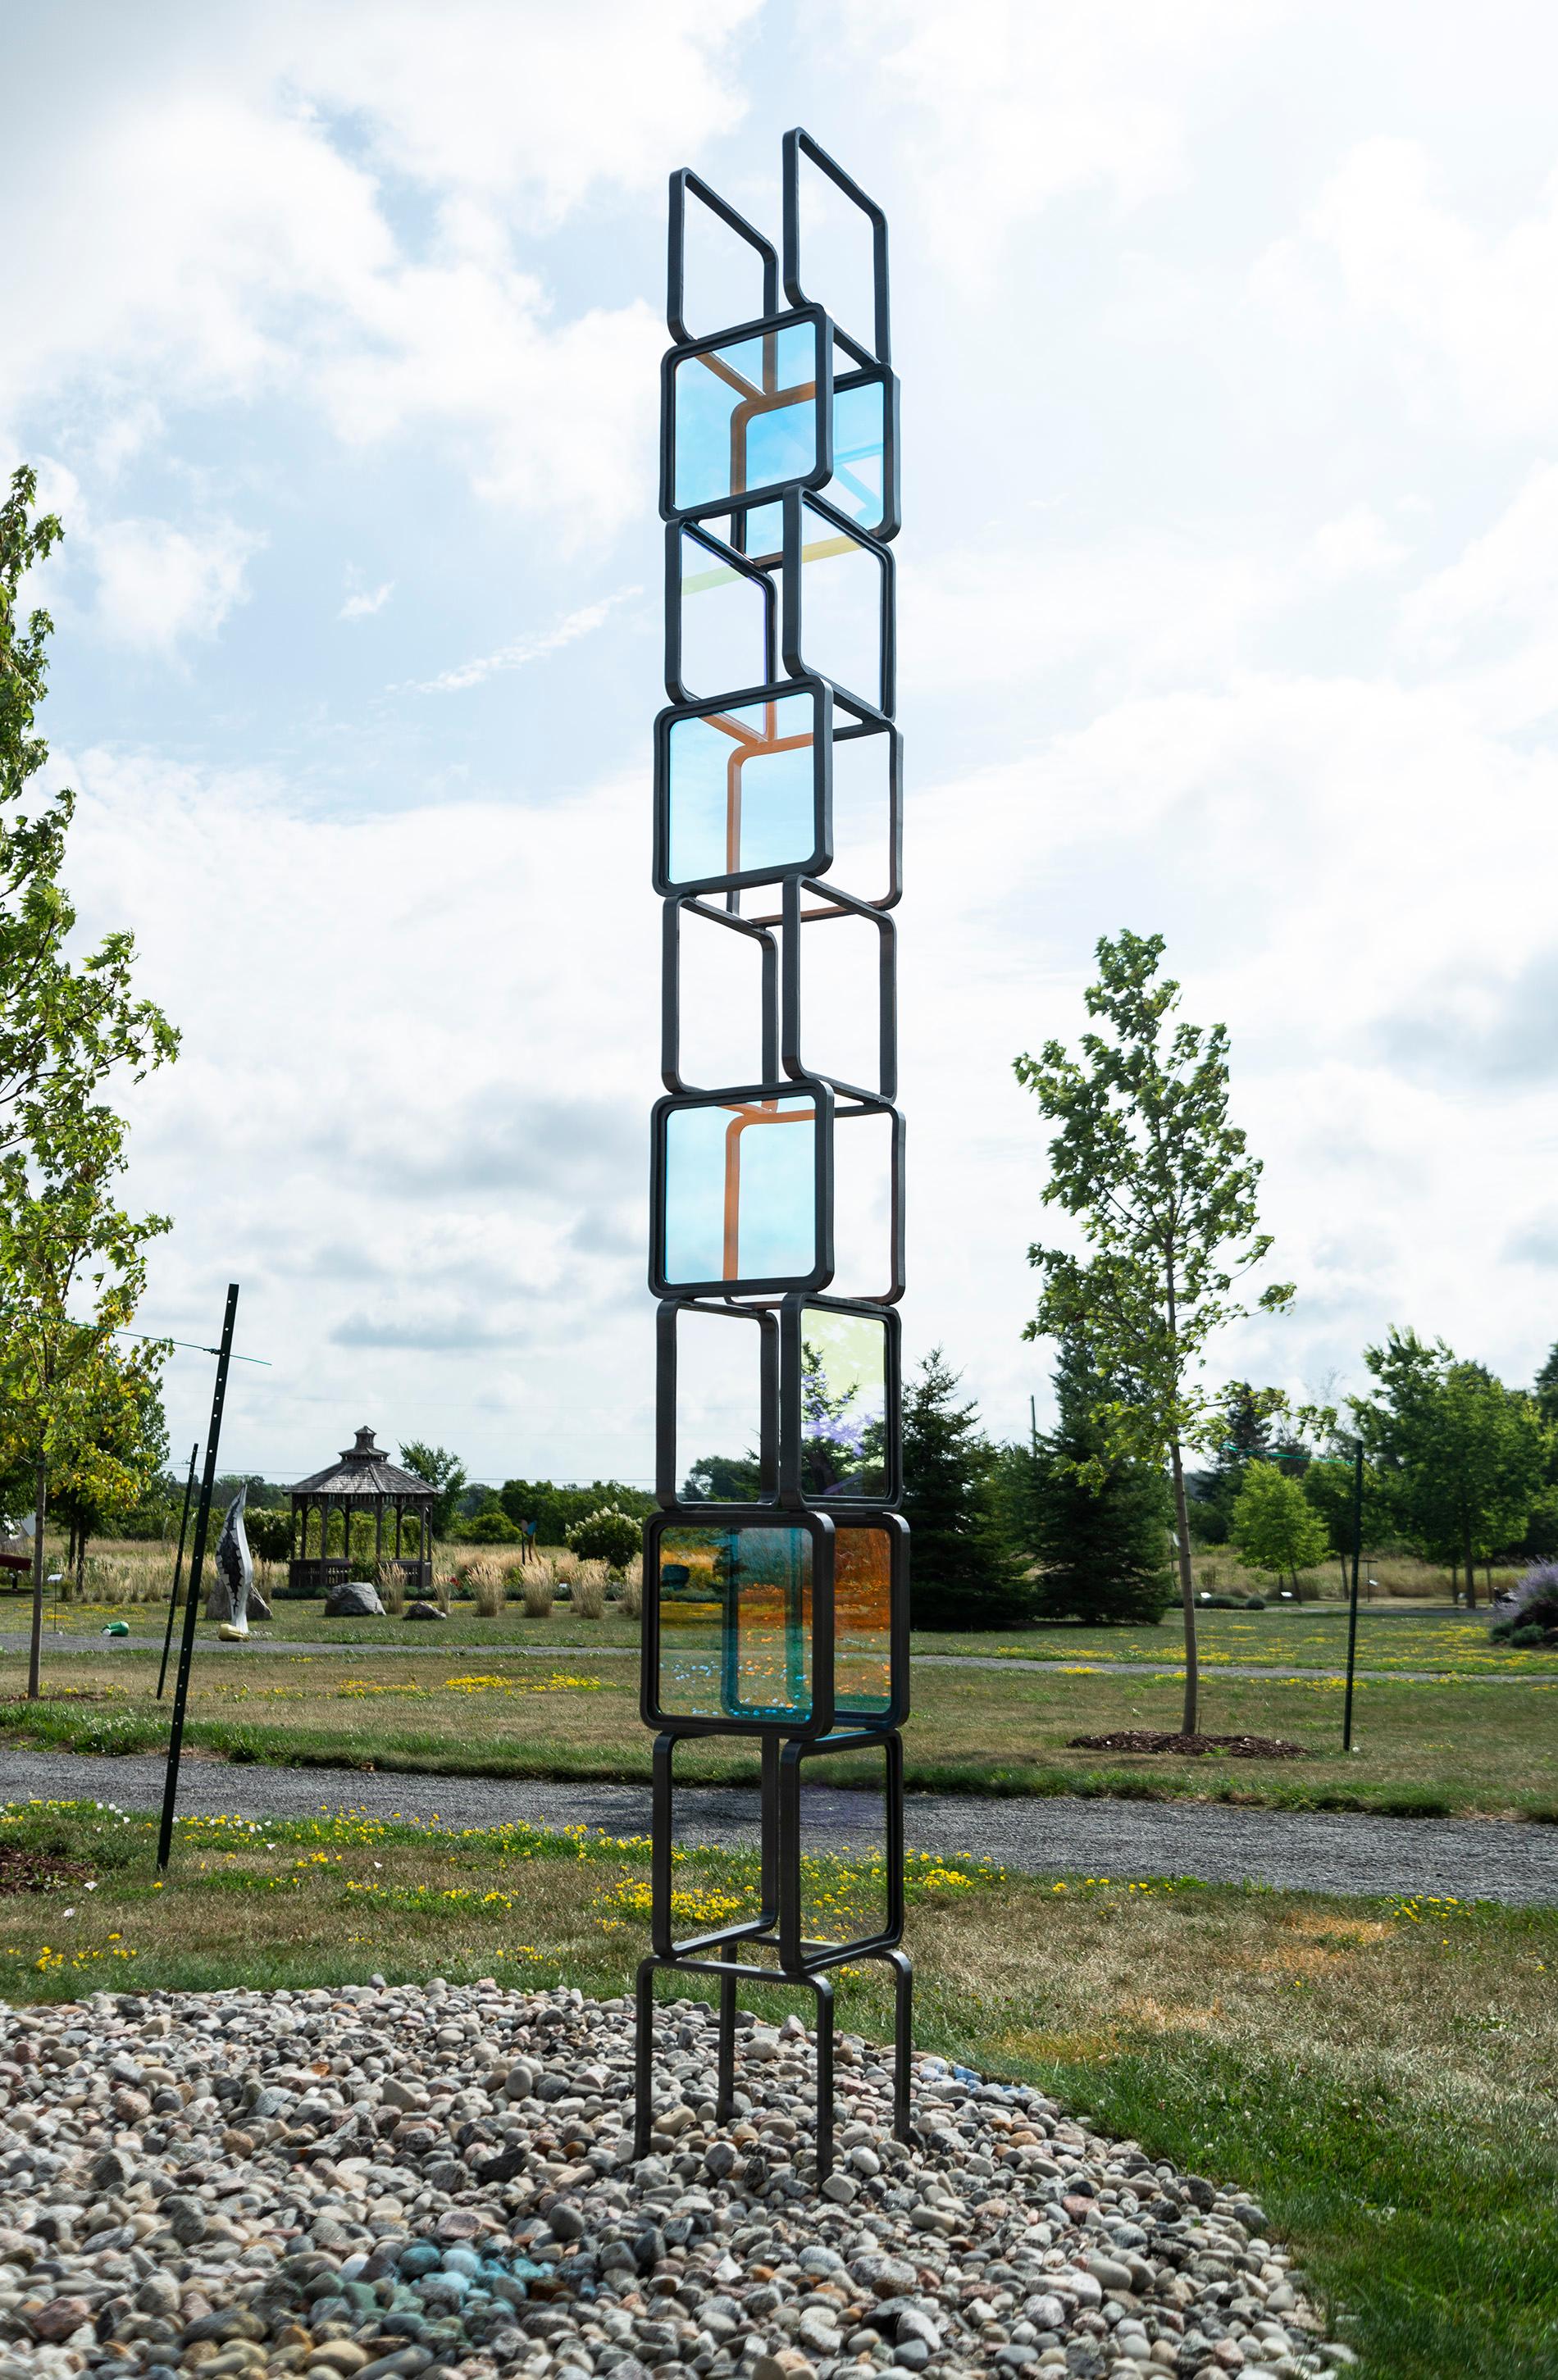 Chroma Tower No 1 - tall, geometric abstract, steel and glass sculpture - Beige Abstract Sculpture by Ryan Van Der Hout